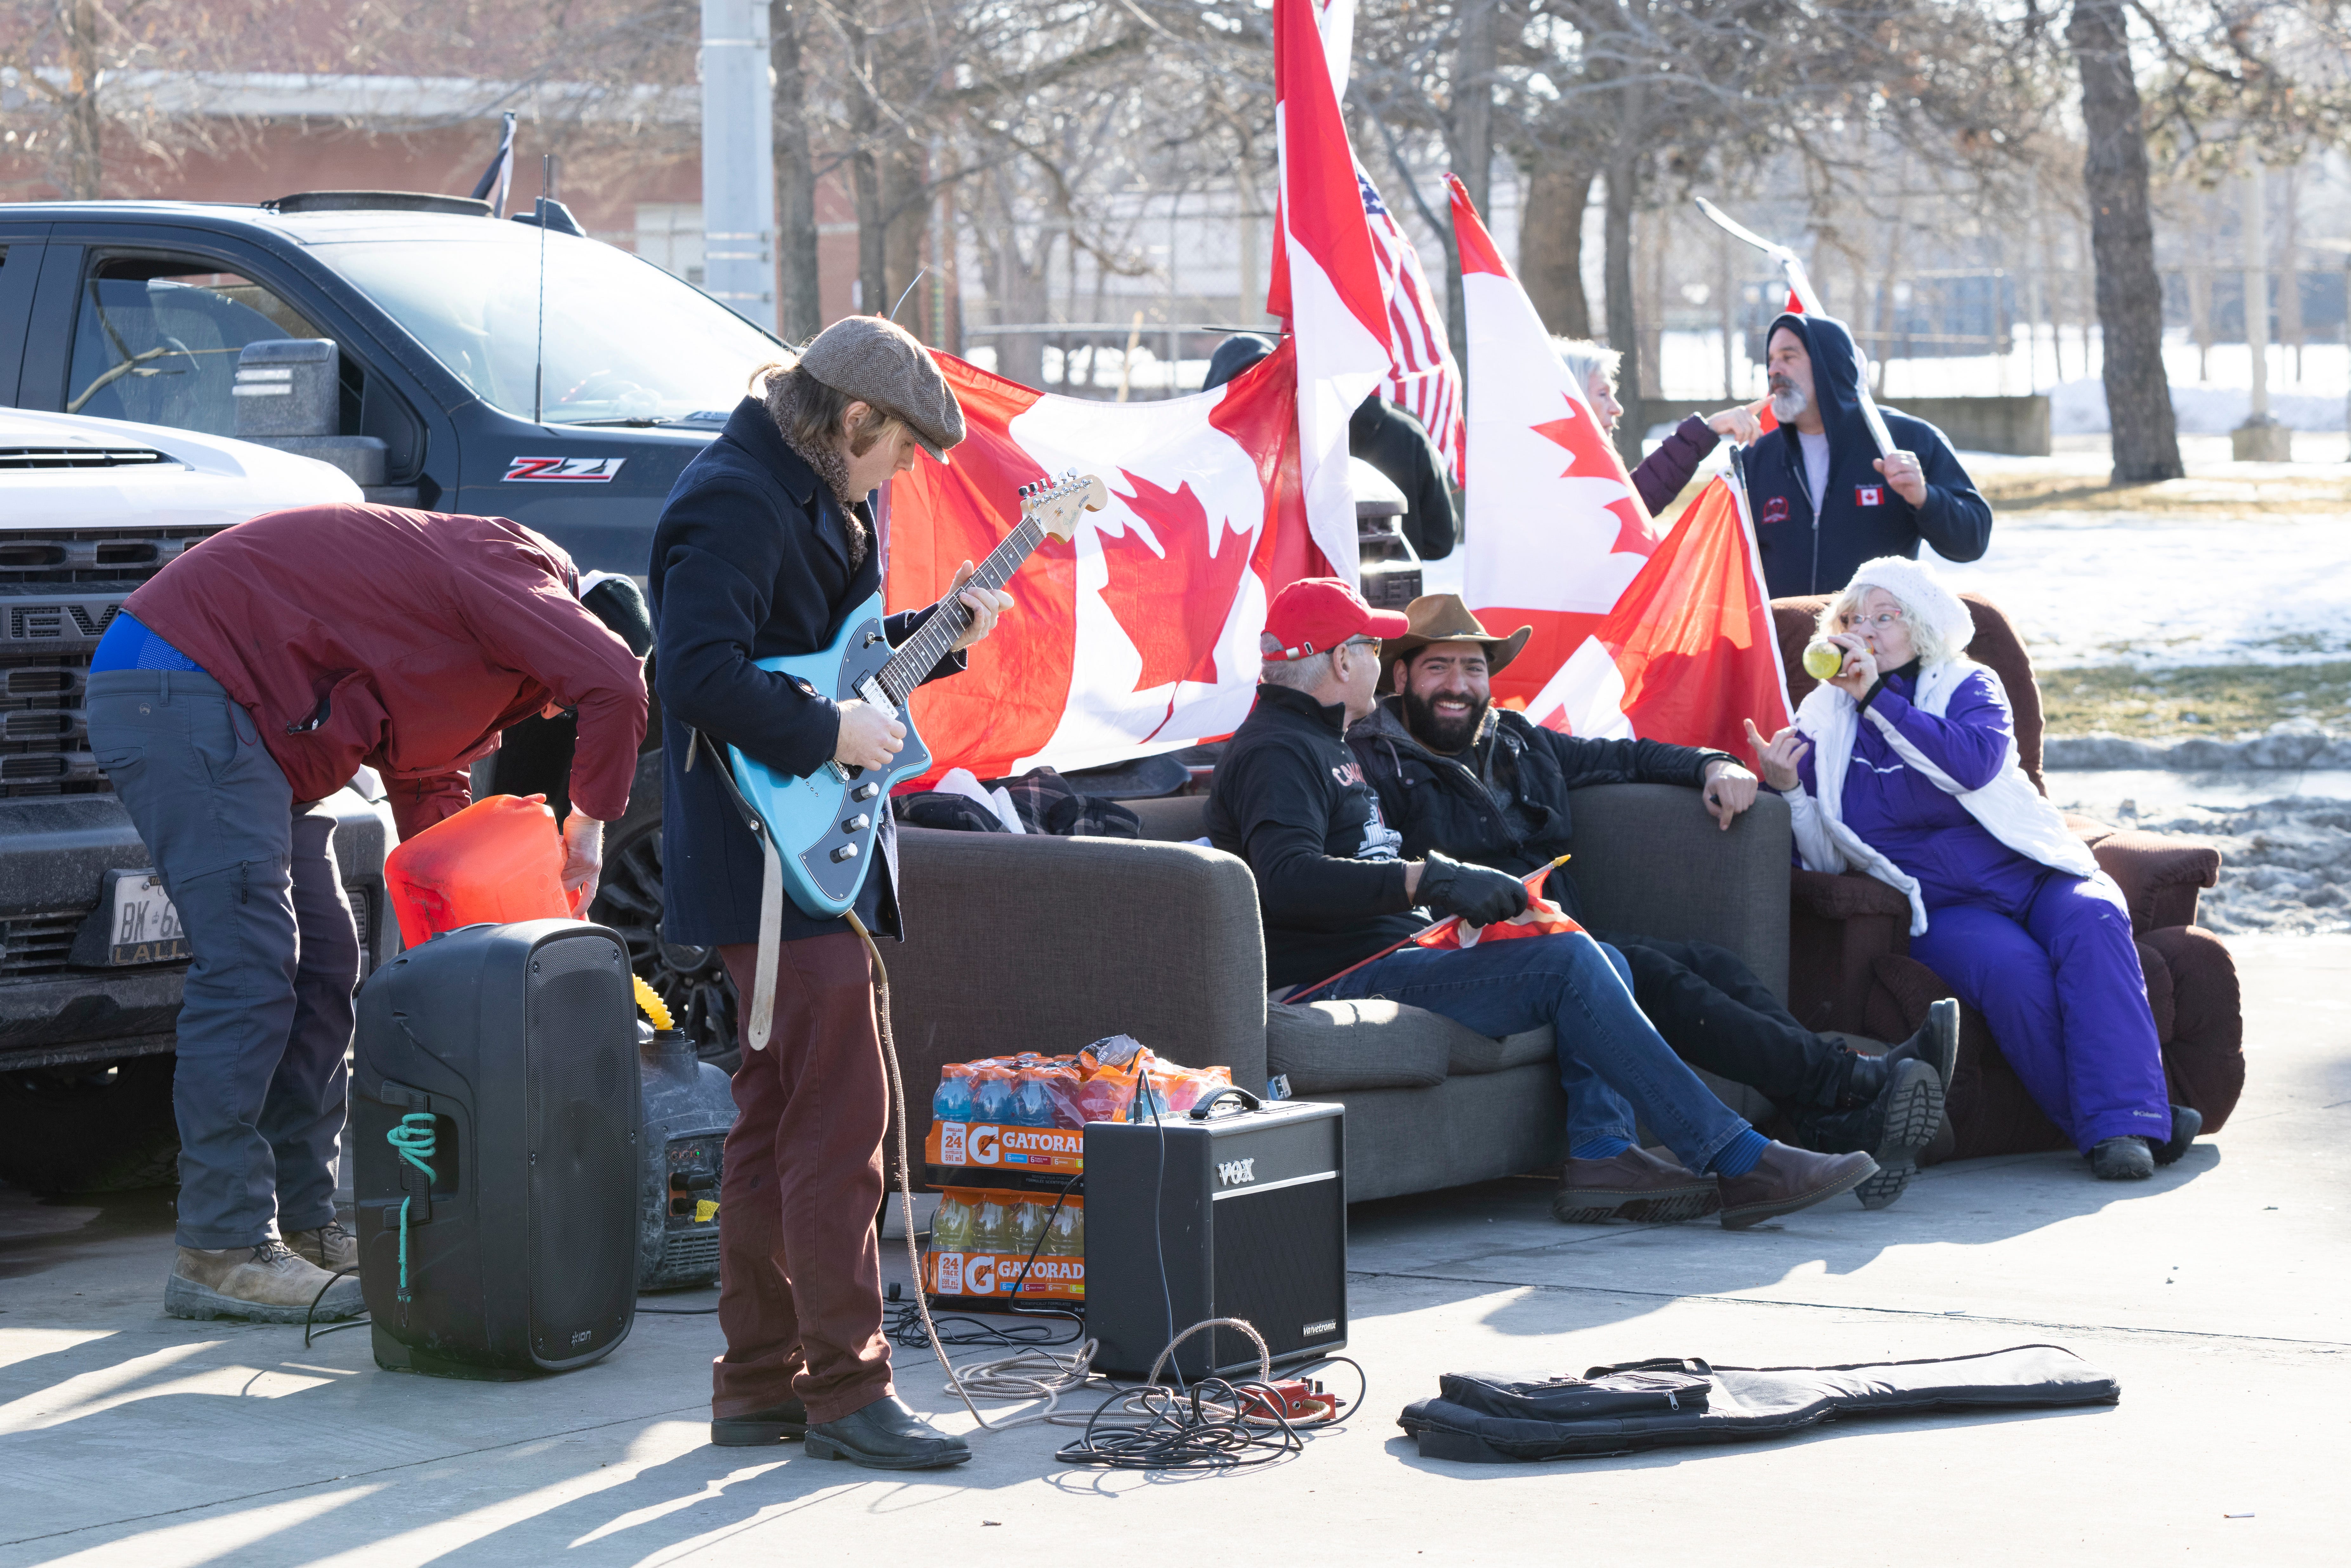 People take part in a protest blocking traffic at the Ambassador Bridge, linking Windsor, Ontario and Detroit on Wednesday, Feb. 9, 2022. The demonstration in solidarity with protests in Ottawa against COVID-19 restrictions has blocked traffic into Canada on the Ambassador Bridge linking Windsor and Detroit since Monday and is the the single busiest commercial crossing in North America.